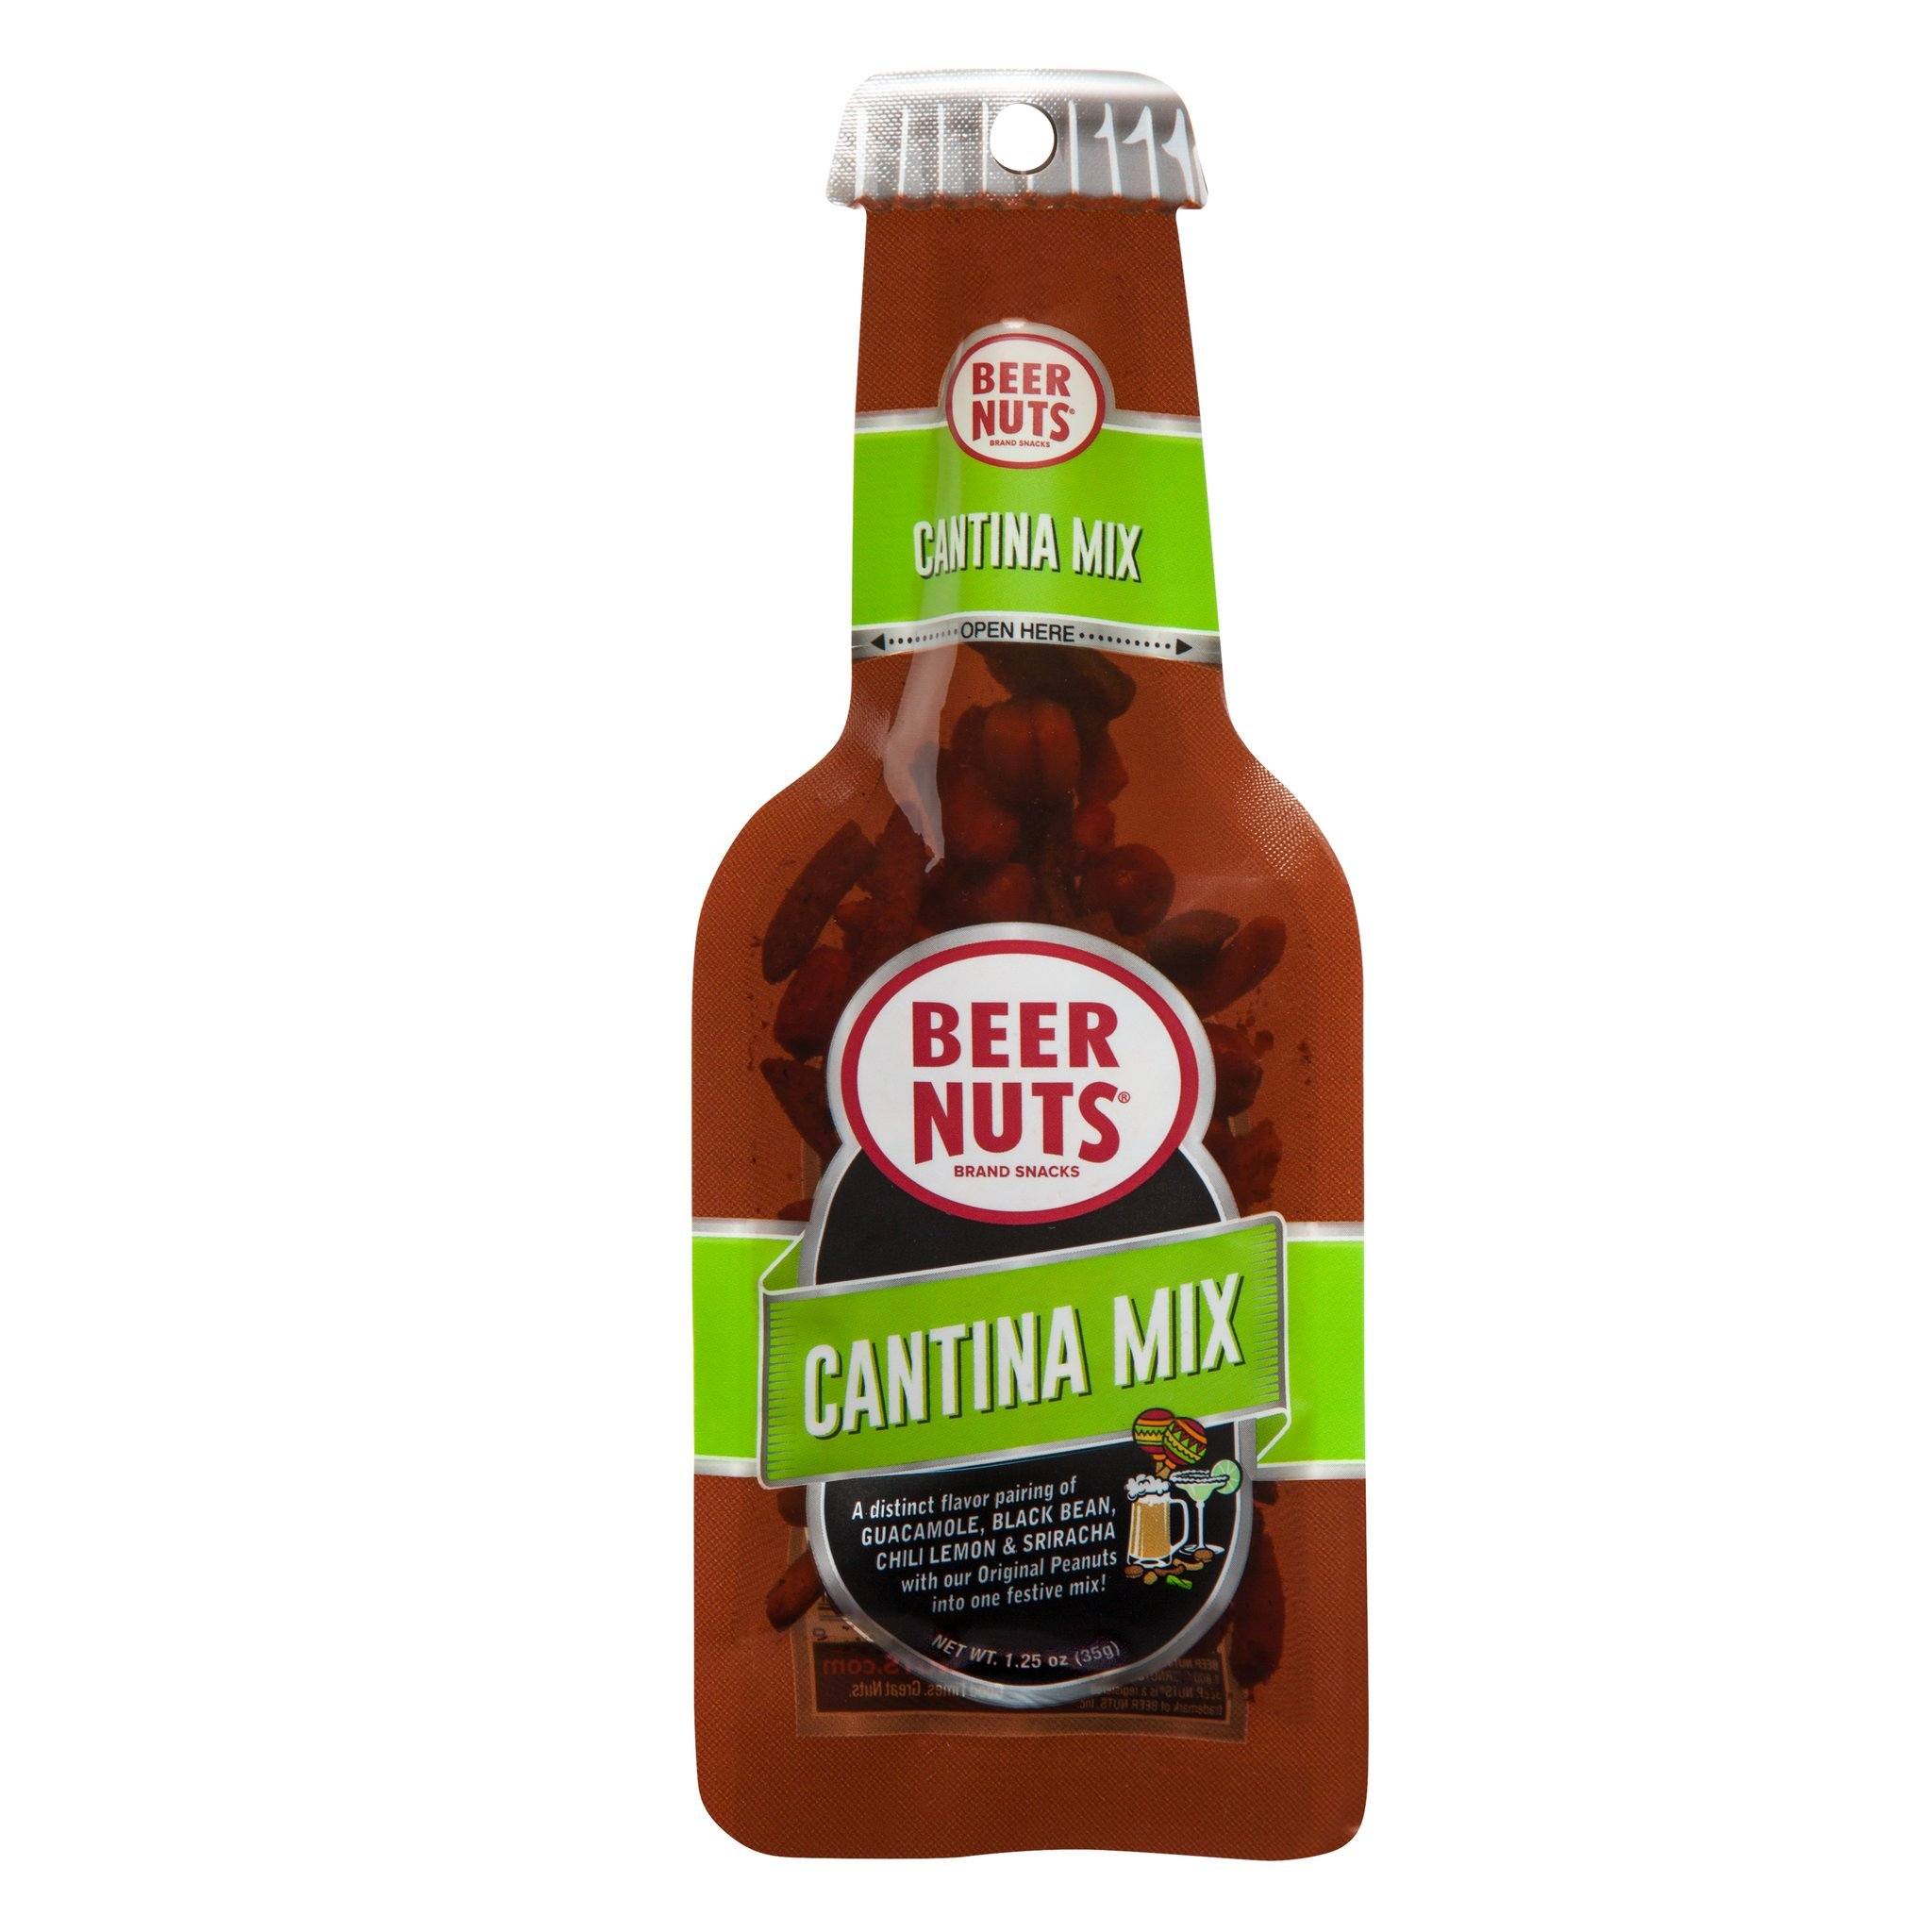 BEER NUTS Beer Nuts Cantina Mix 1.25 Ounce 